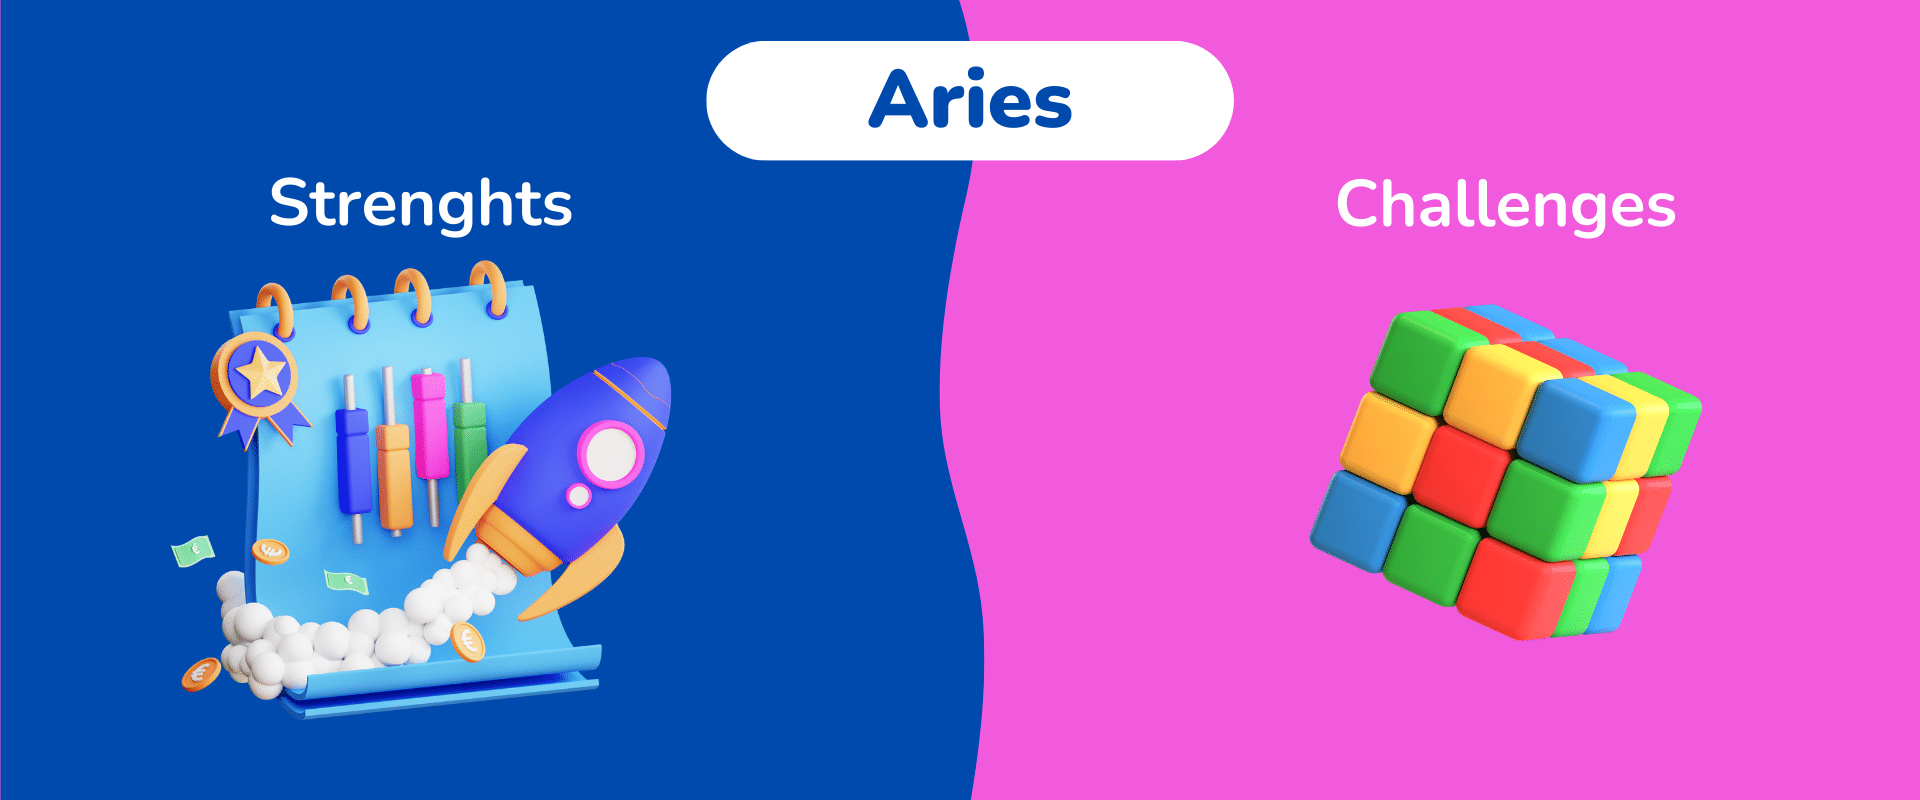 aries strenghts and challenges